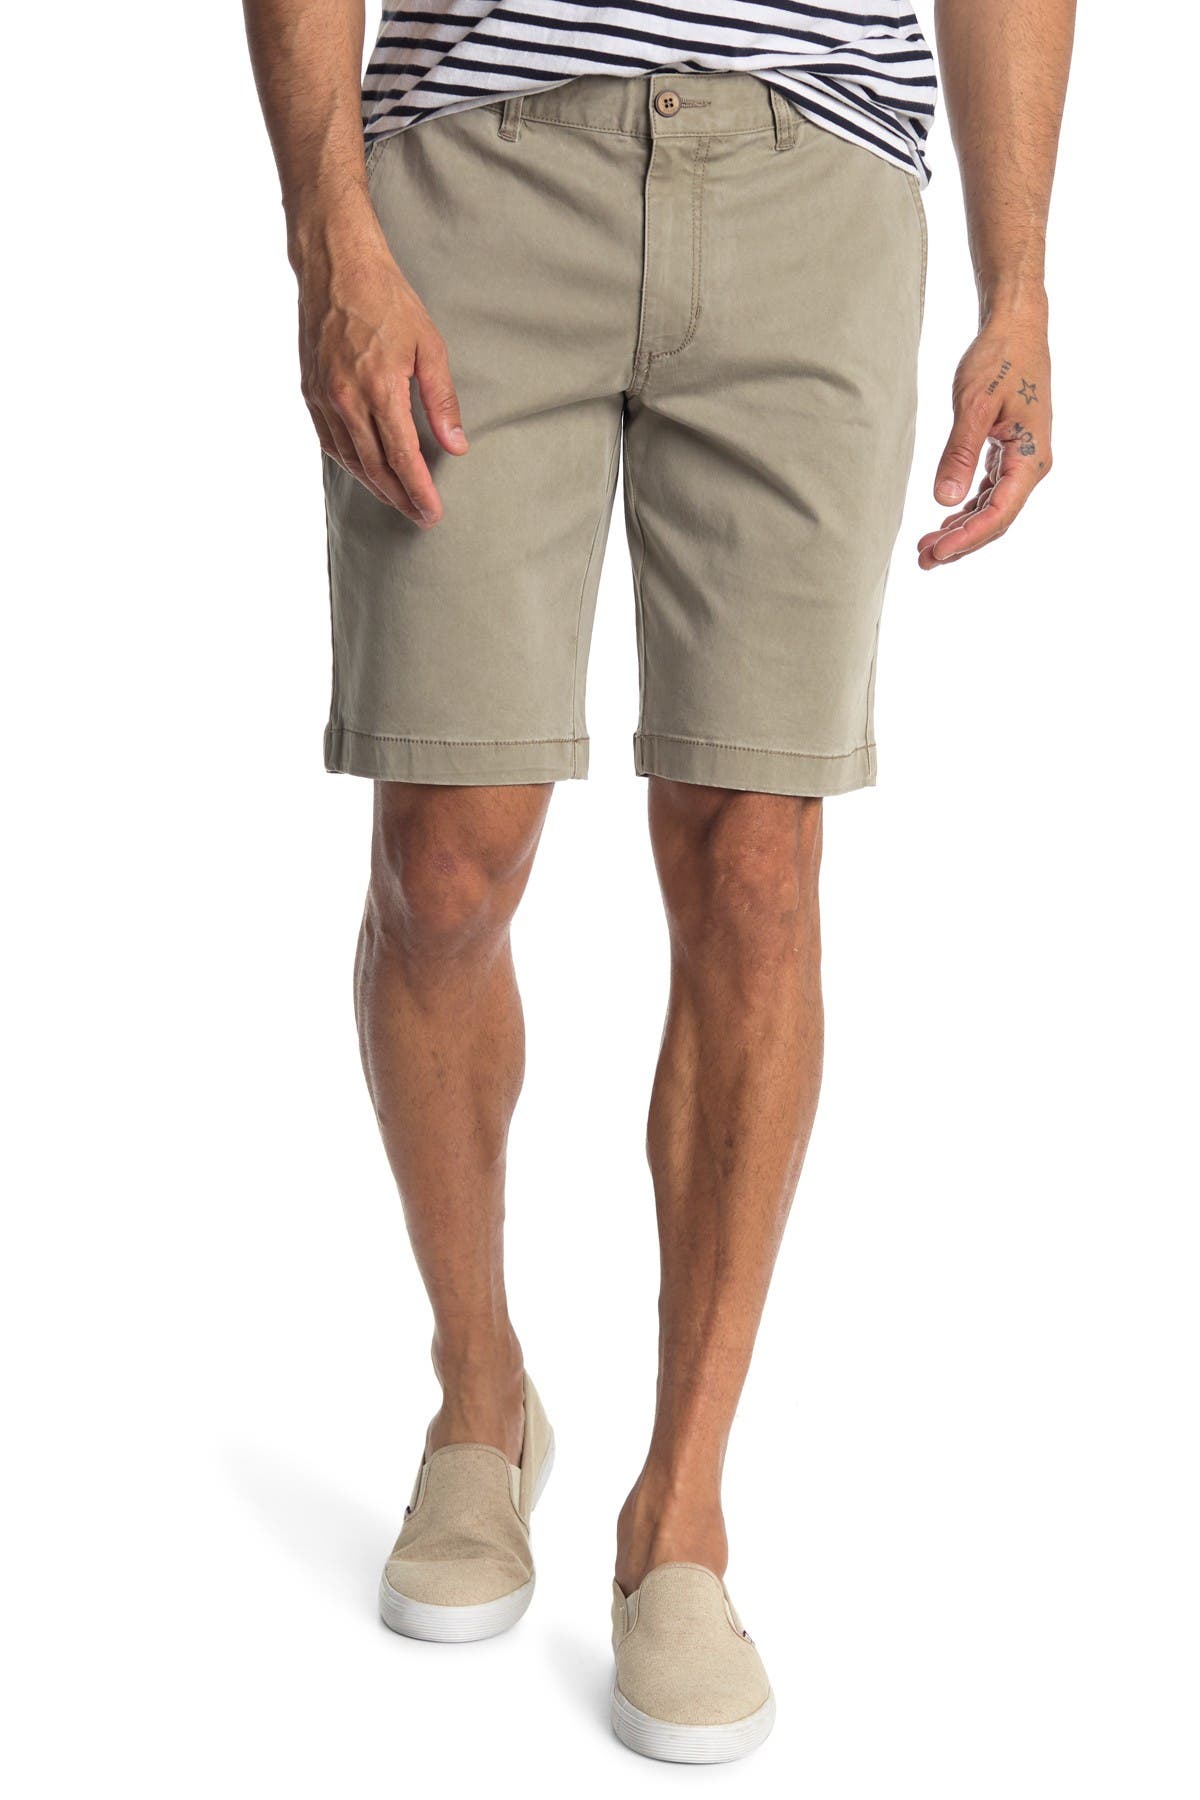 nordstrom tommy bahama sale